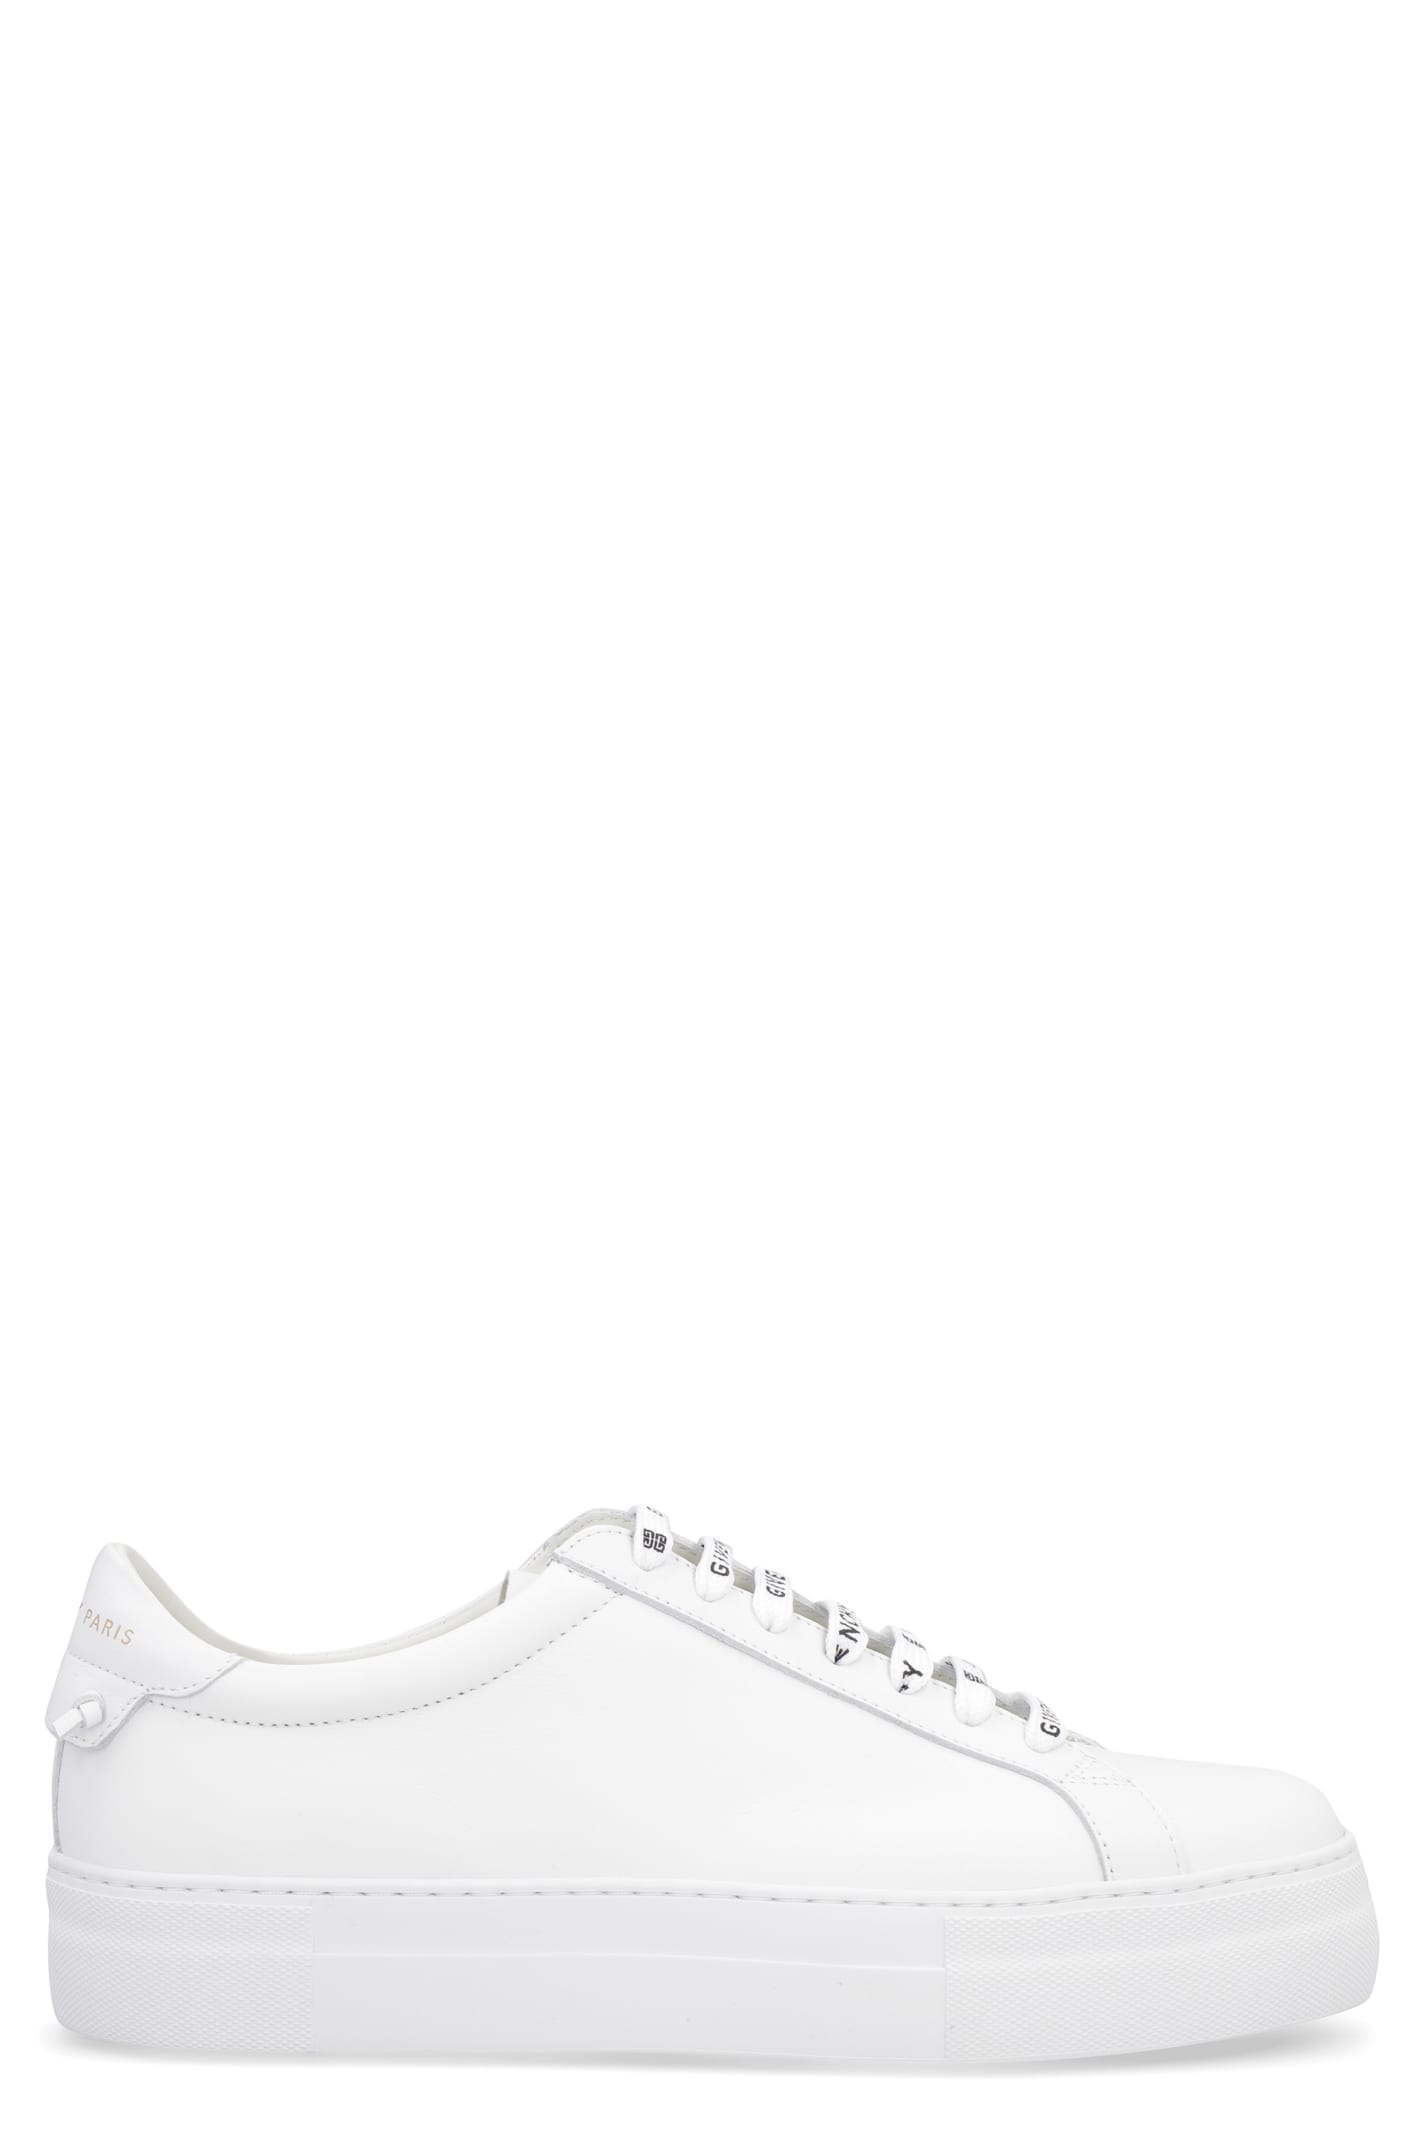 Givenchy Urban Street Leather Low-top Sneakers